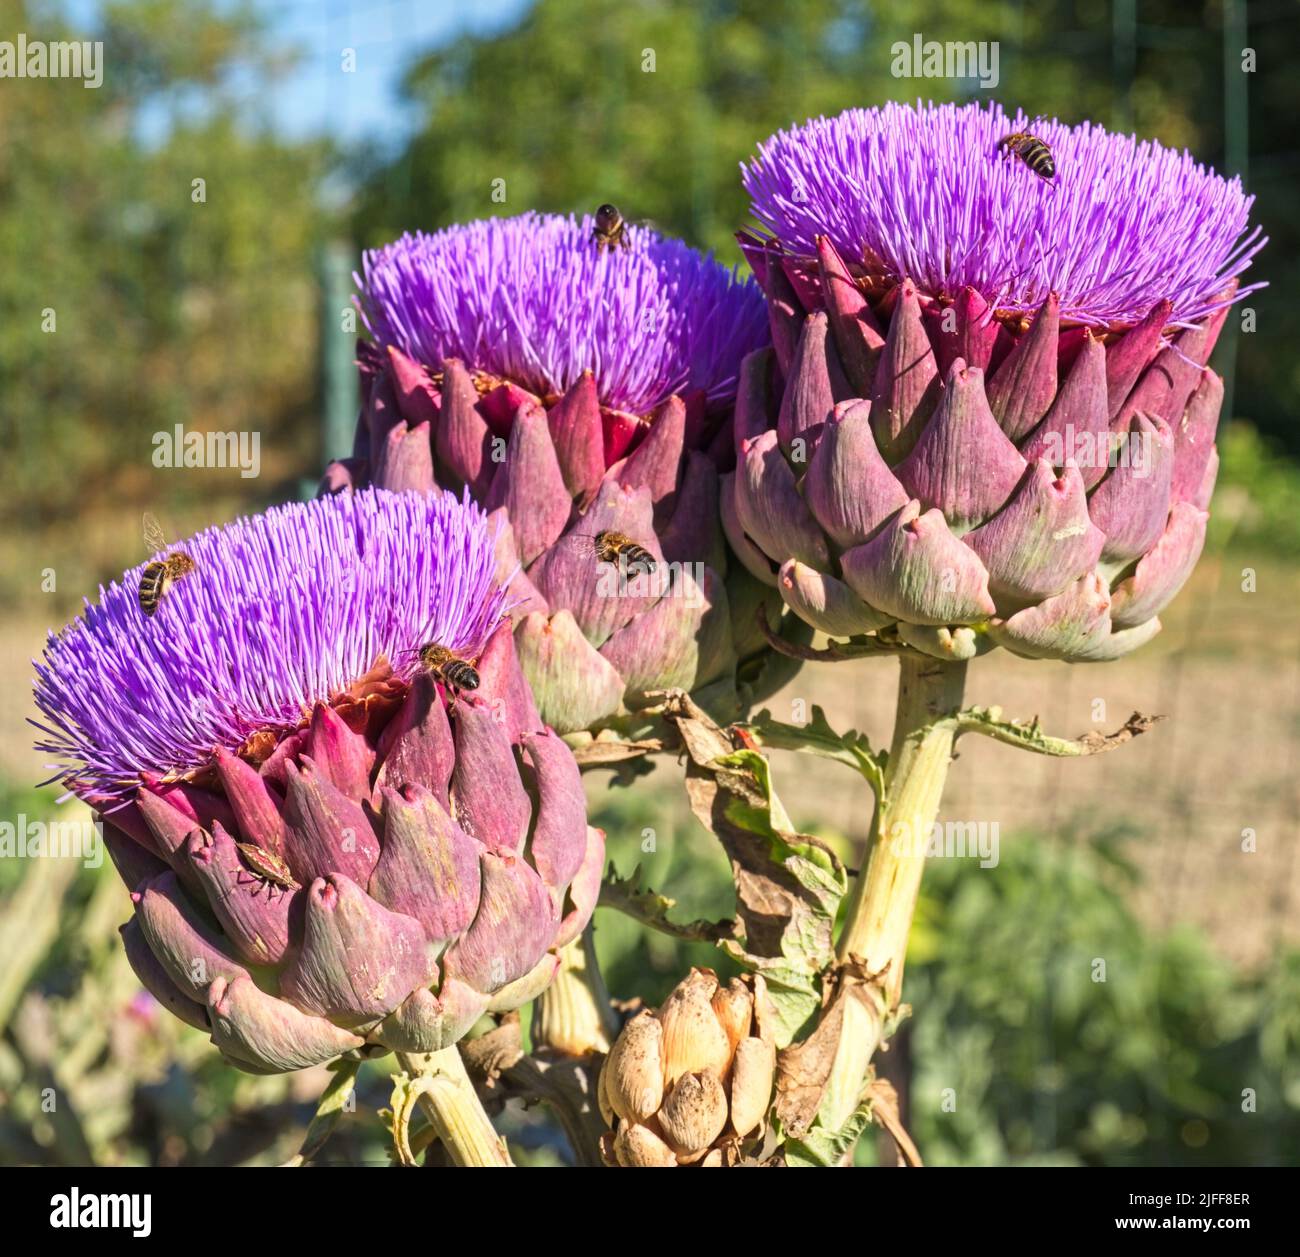 Close up image. Anemone like purple blooms of three artichokes. Numerous triangular scales of rich reds and greens. Worker bees hovering and gathering Stock Photo